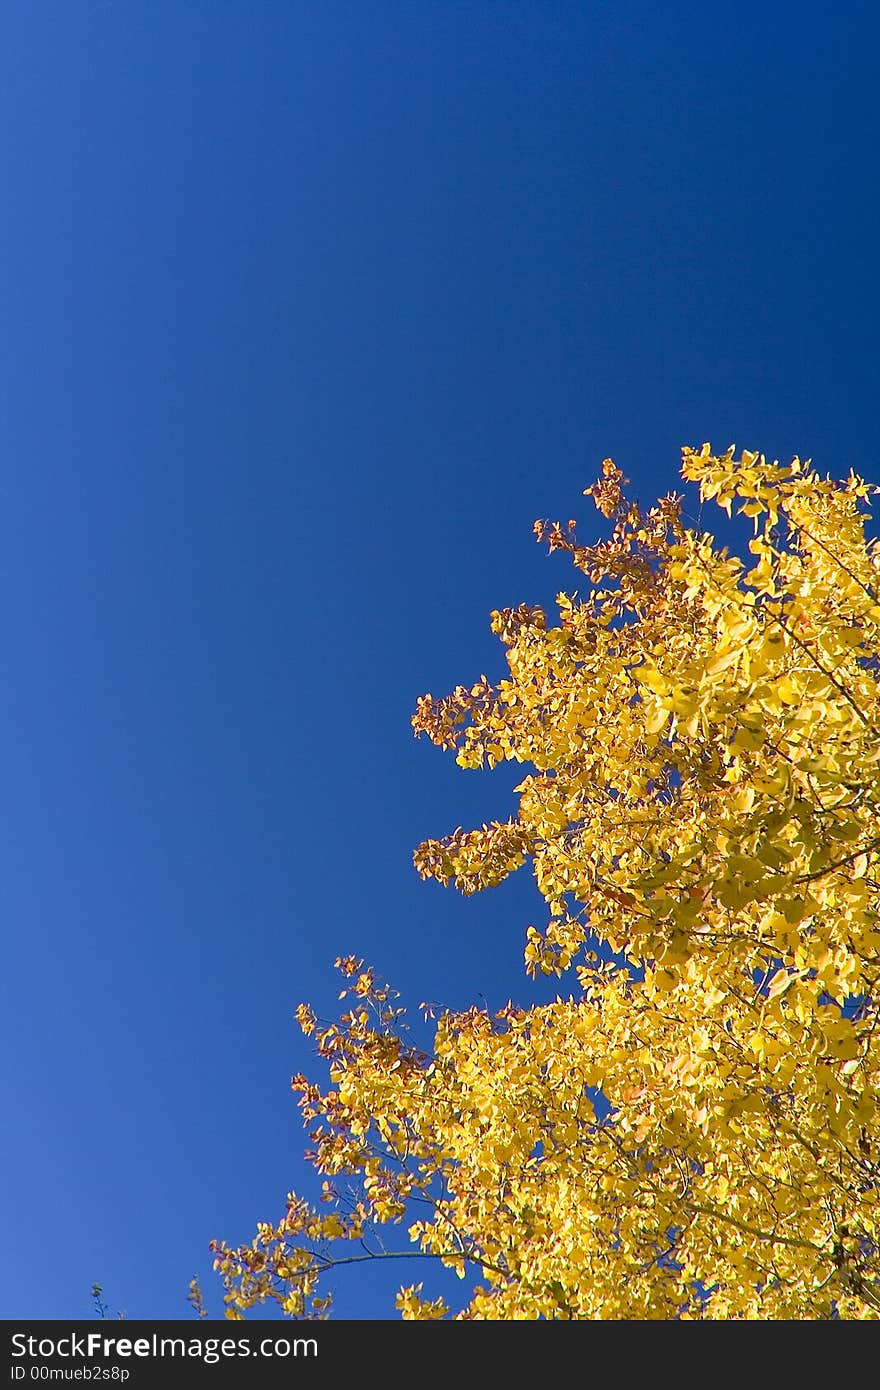 Yellow leaves in the blue sky